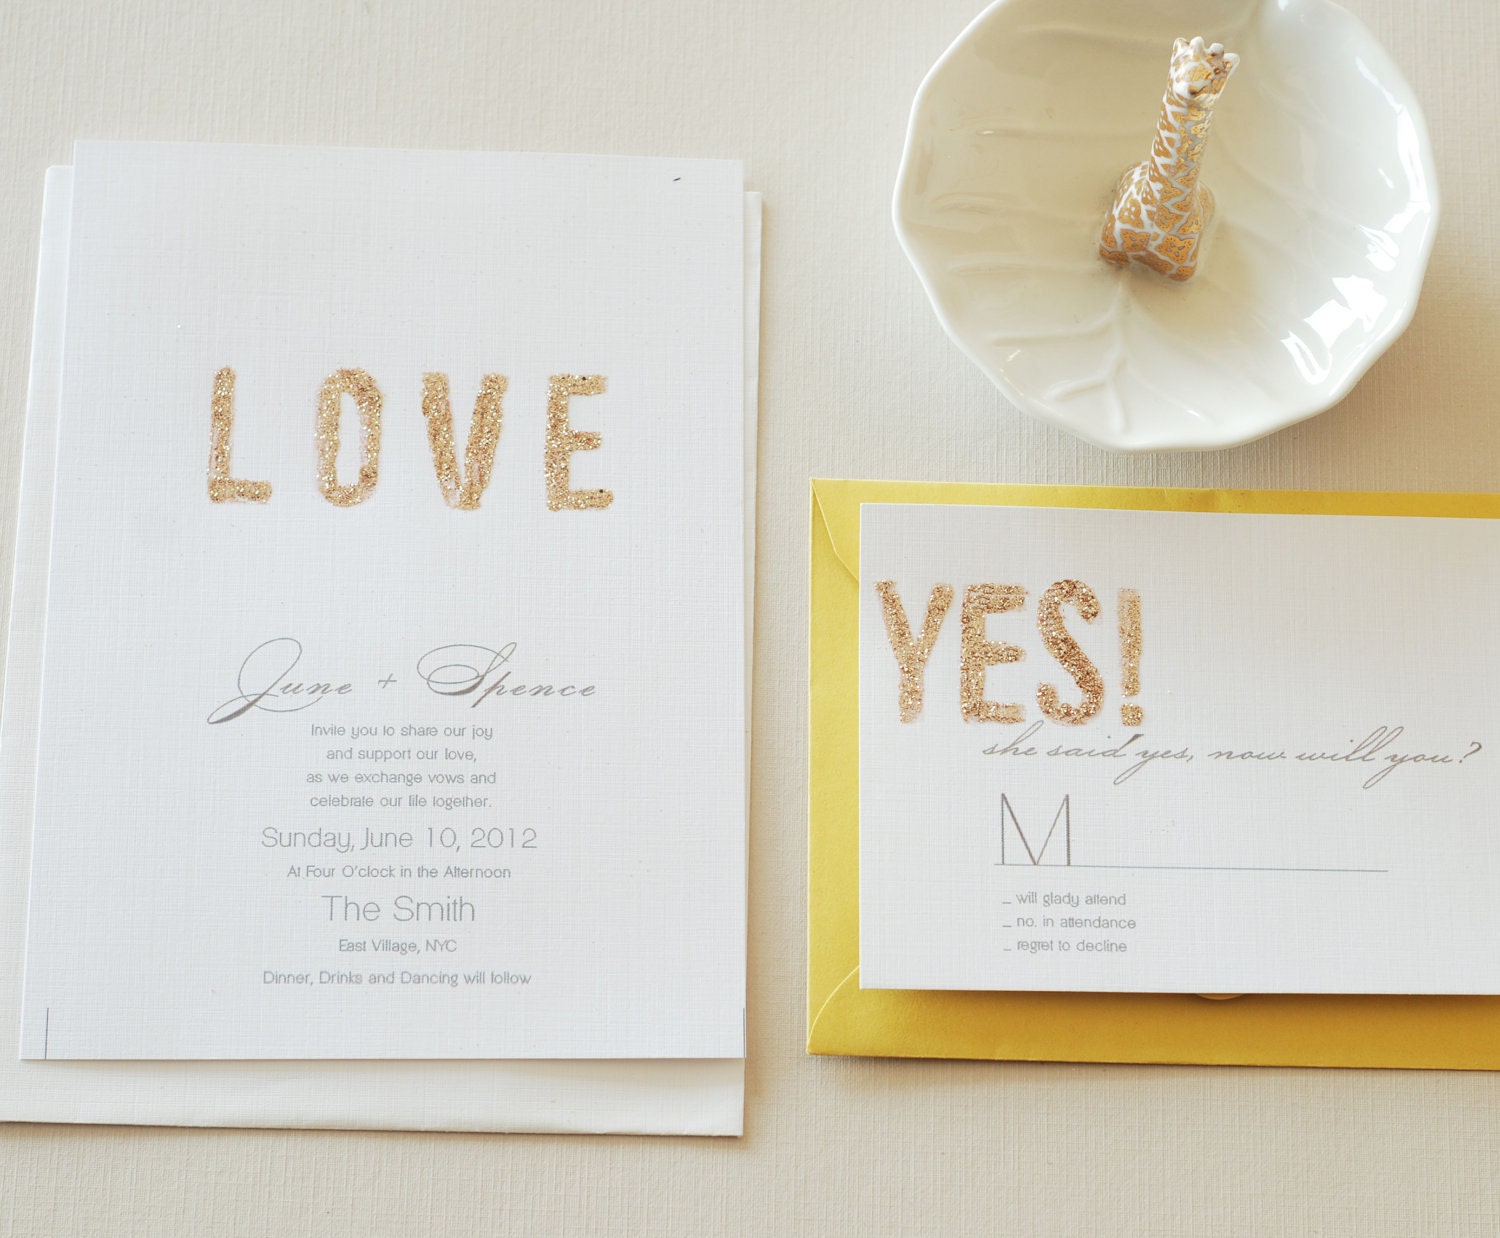 LOVE glitters wedding invite gold white grey chartreuse From umama143